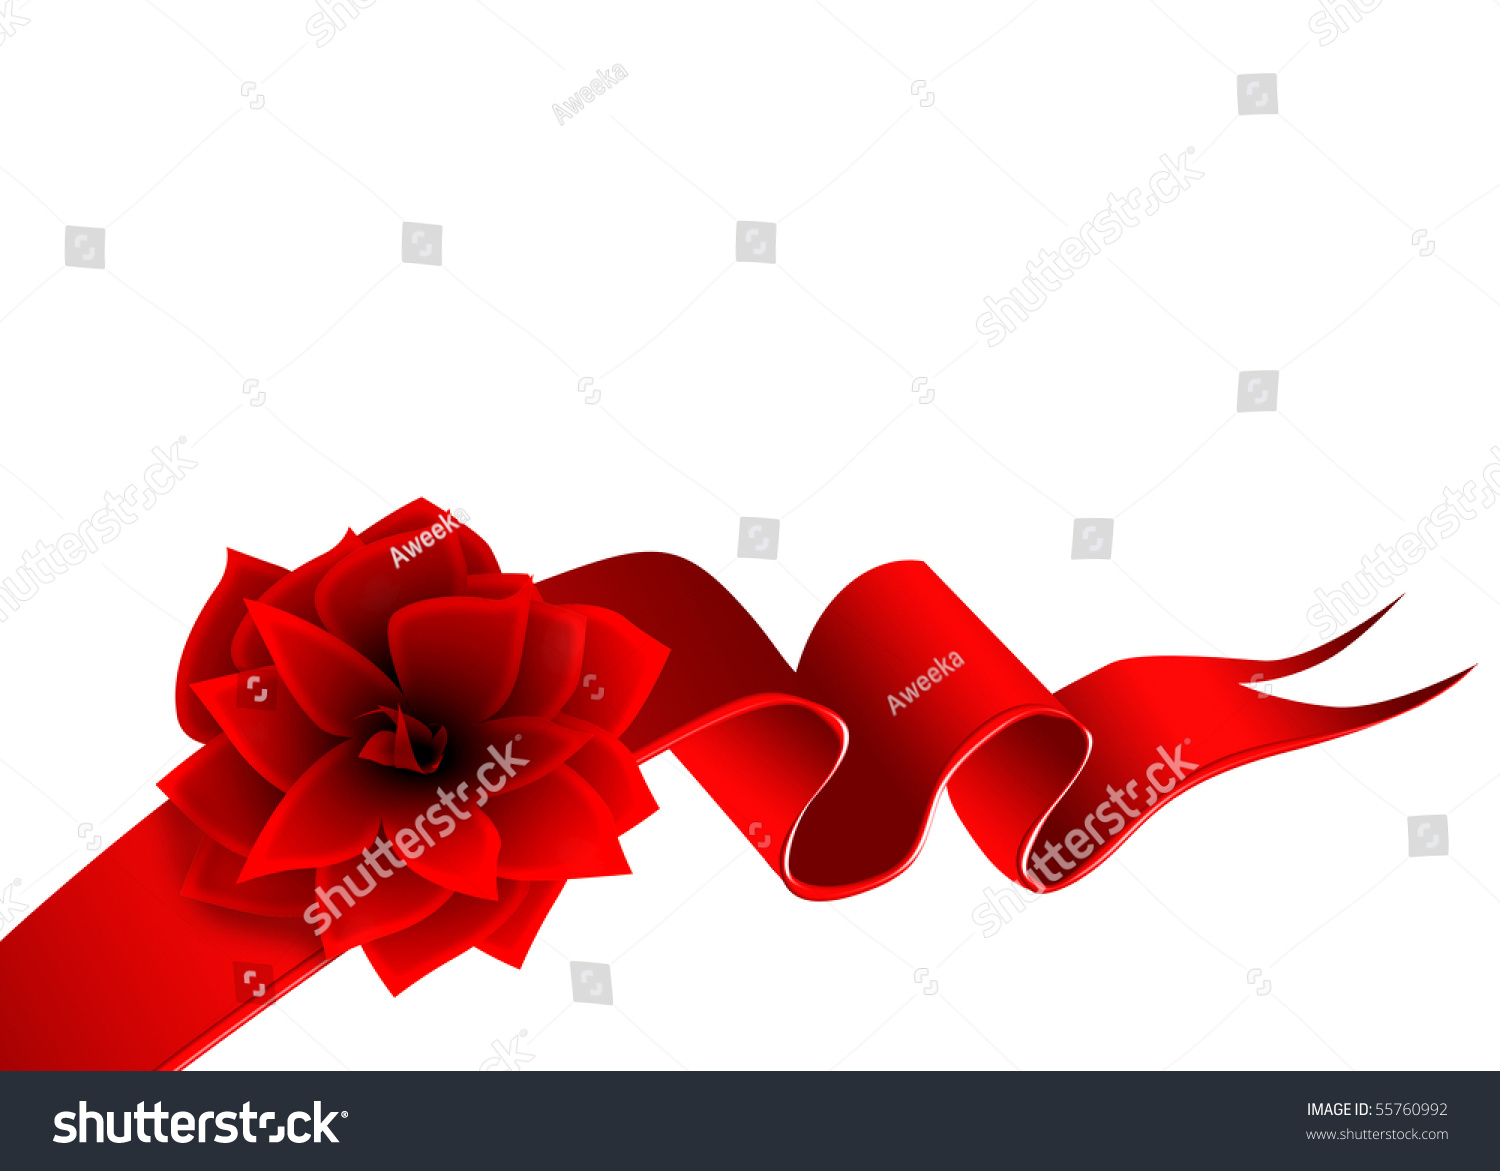 Red Ribbon With Flower Background Stock Photo 55760992 : Shutterstock